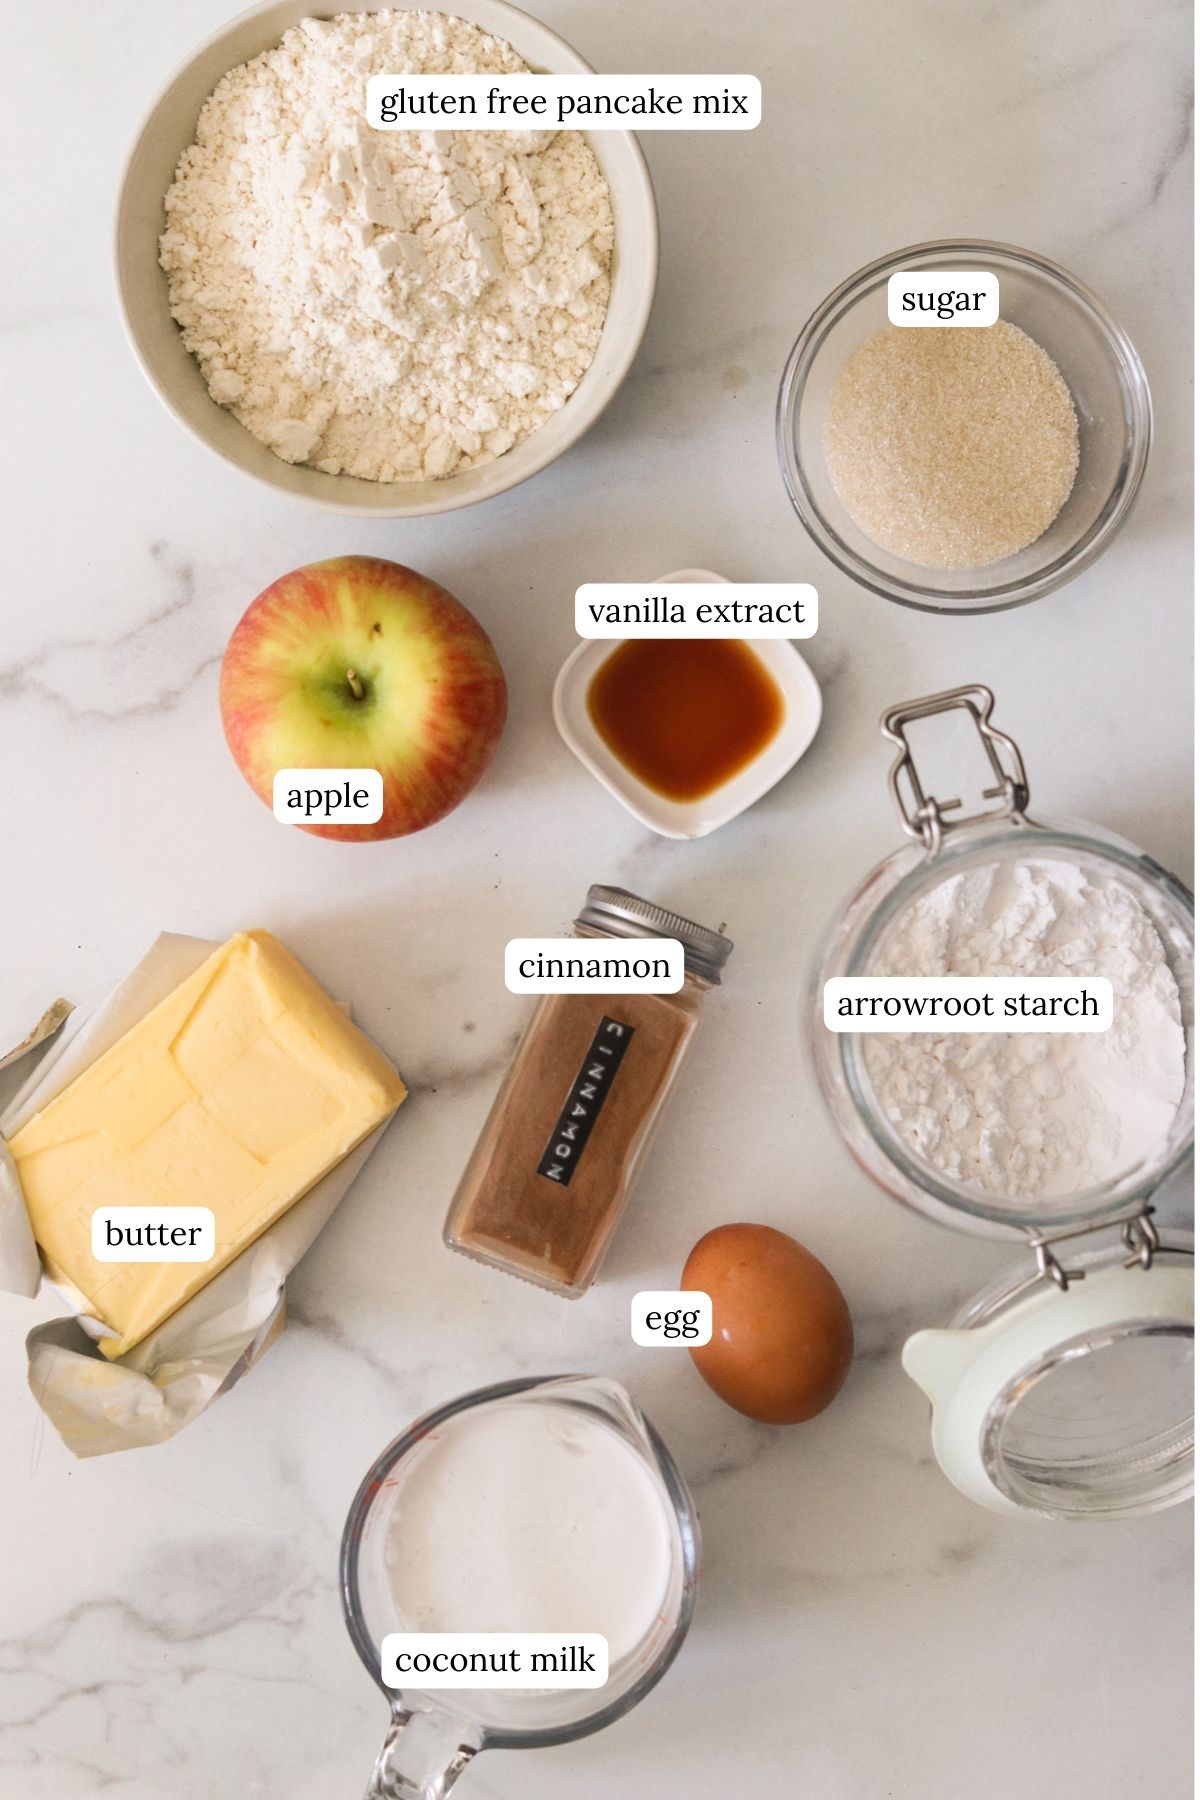 a photo of recipe ingredients: apple, vanilla extract, arrowroot starch, egg, butter, sugar, coconut milk, and pancake mix. 